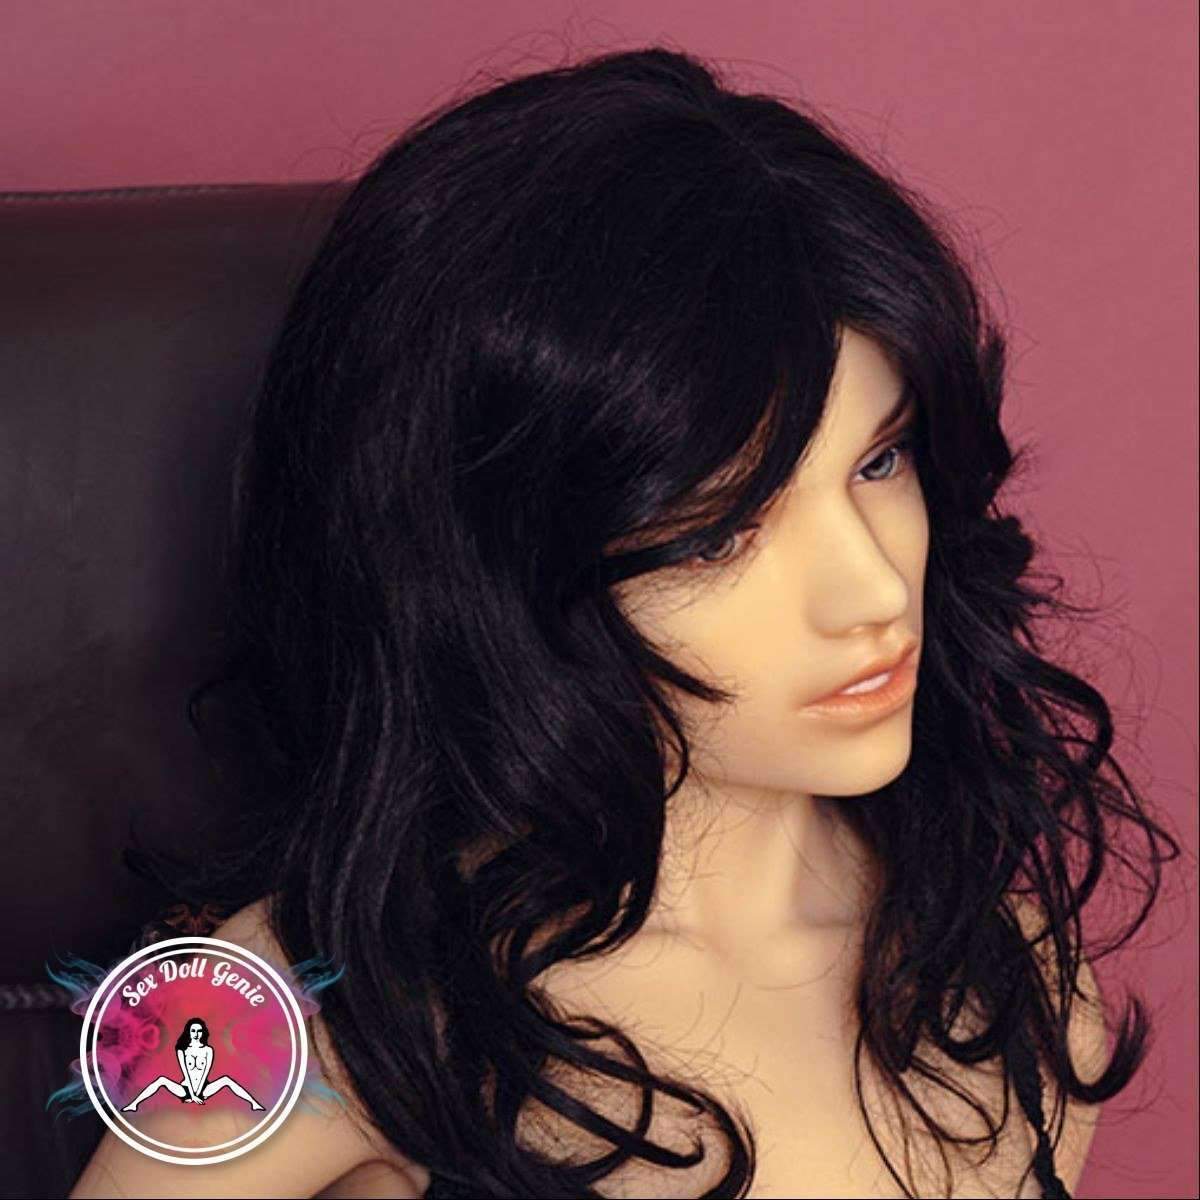 DS Doll - 163 - Mandy Head - Type 1 D Cup Silicone Doll-9